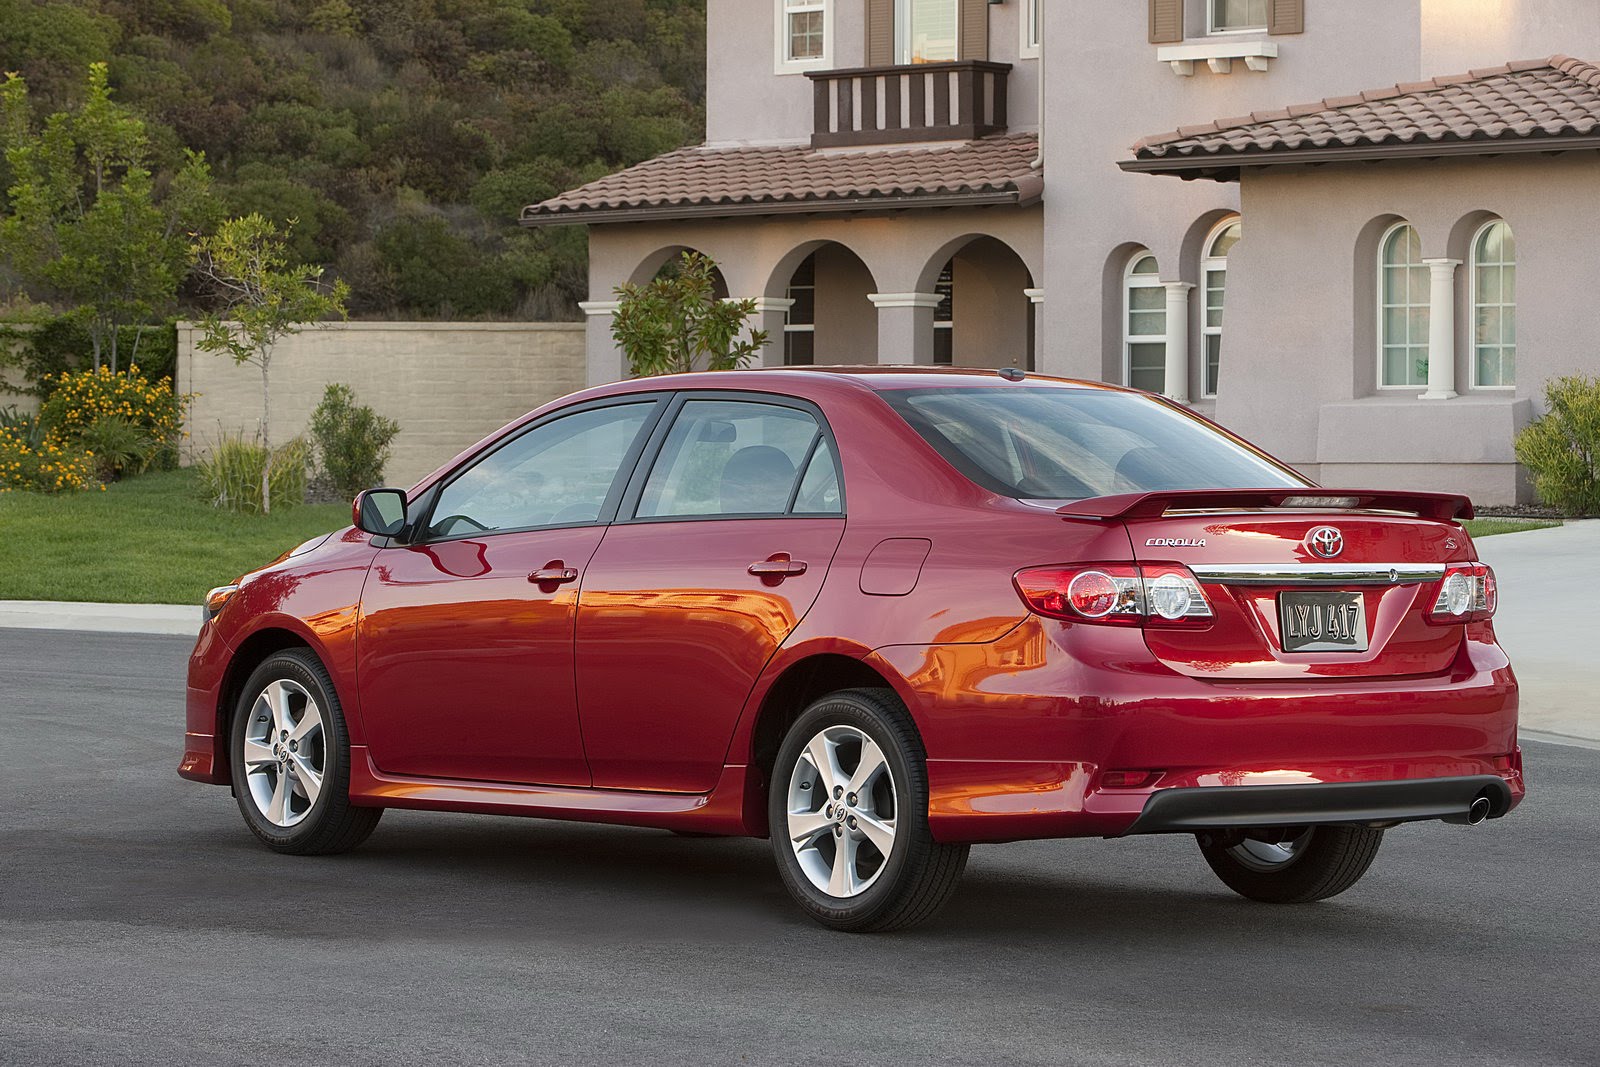 Toyota Pricing for 2011 Corolla and Matrix Facelift